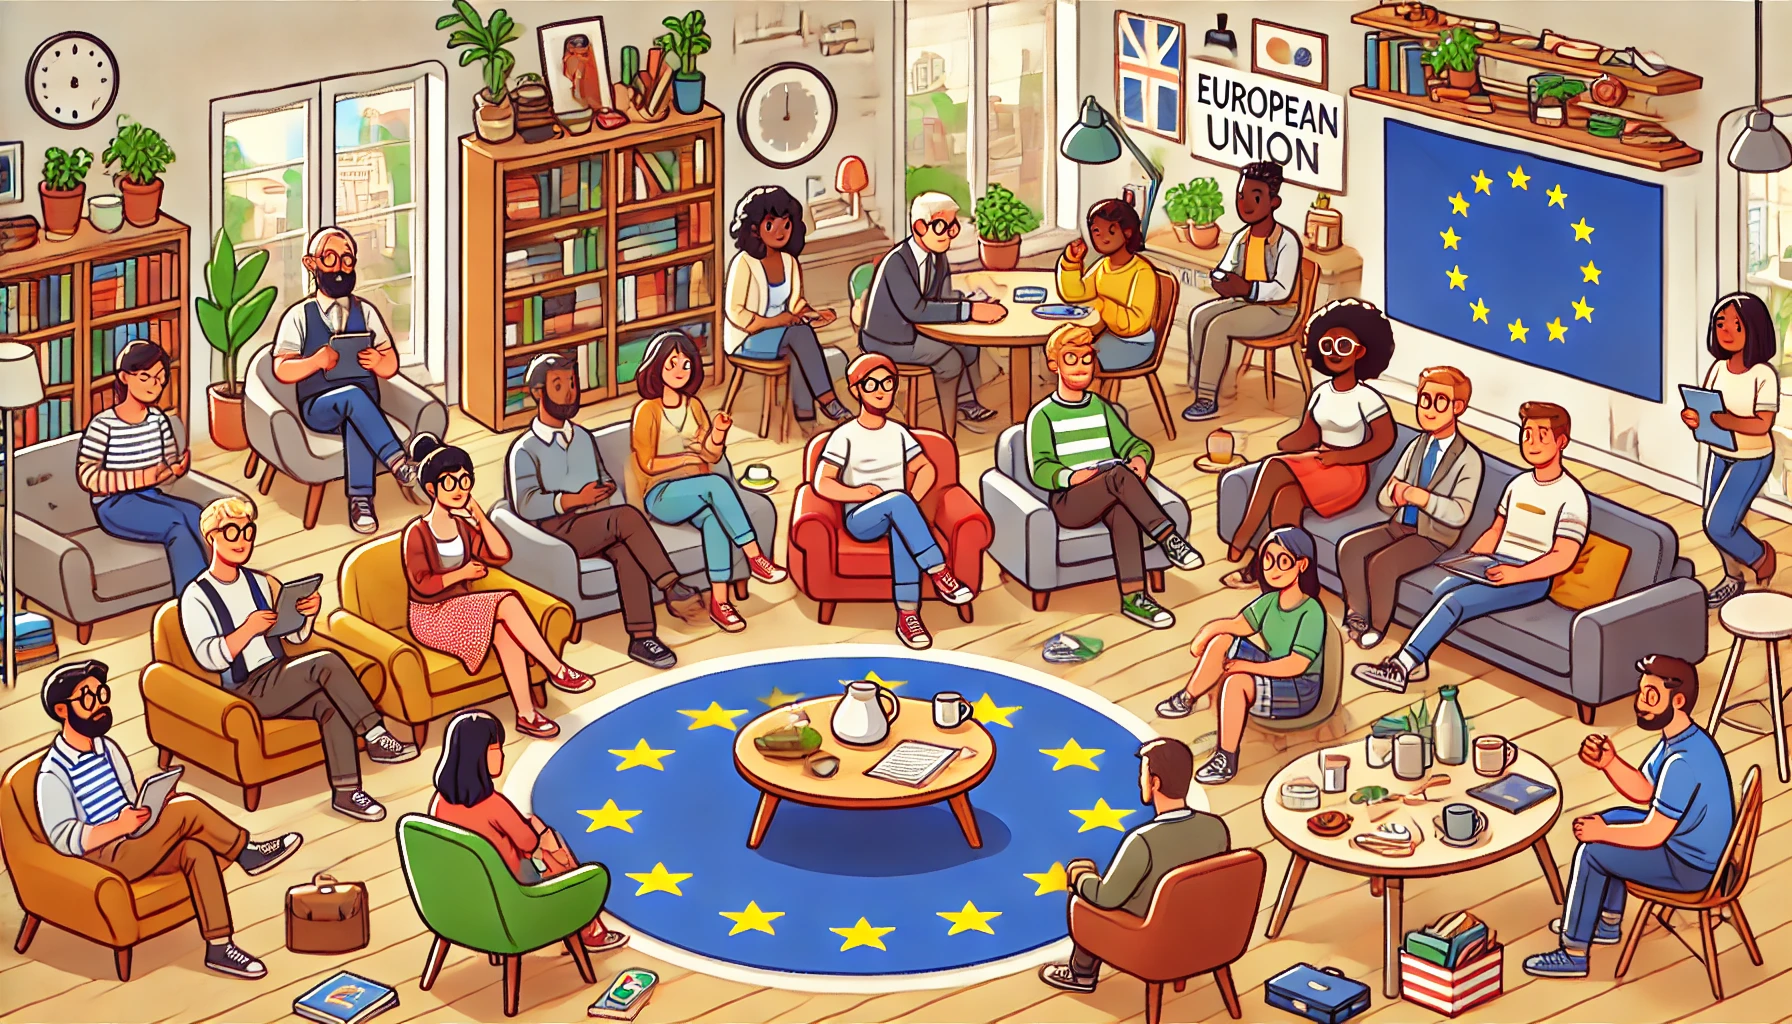 Join our new online group discussions! What role should the EU play in promoting democracy and human rights in nearby countries?